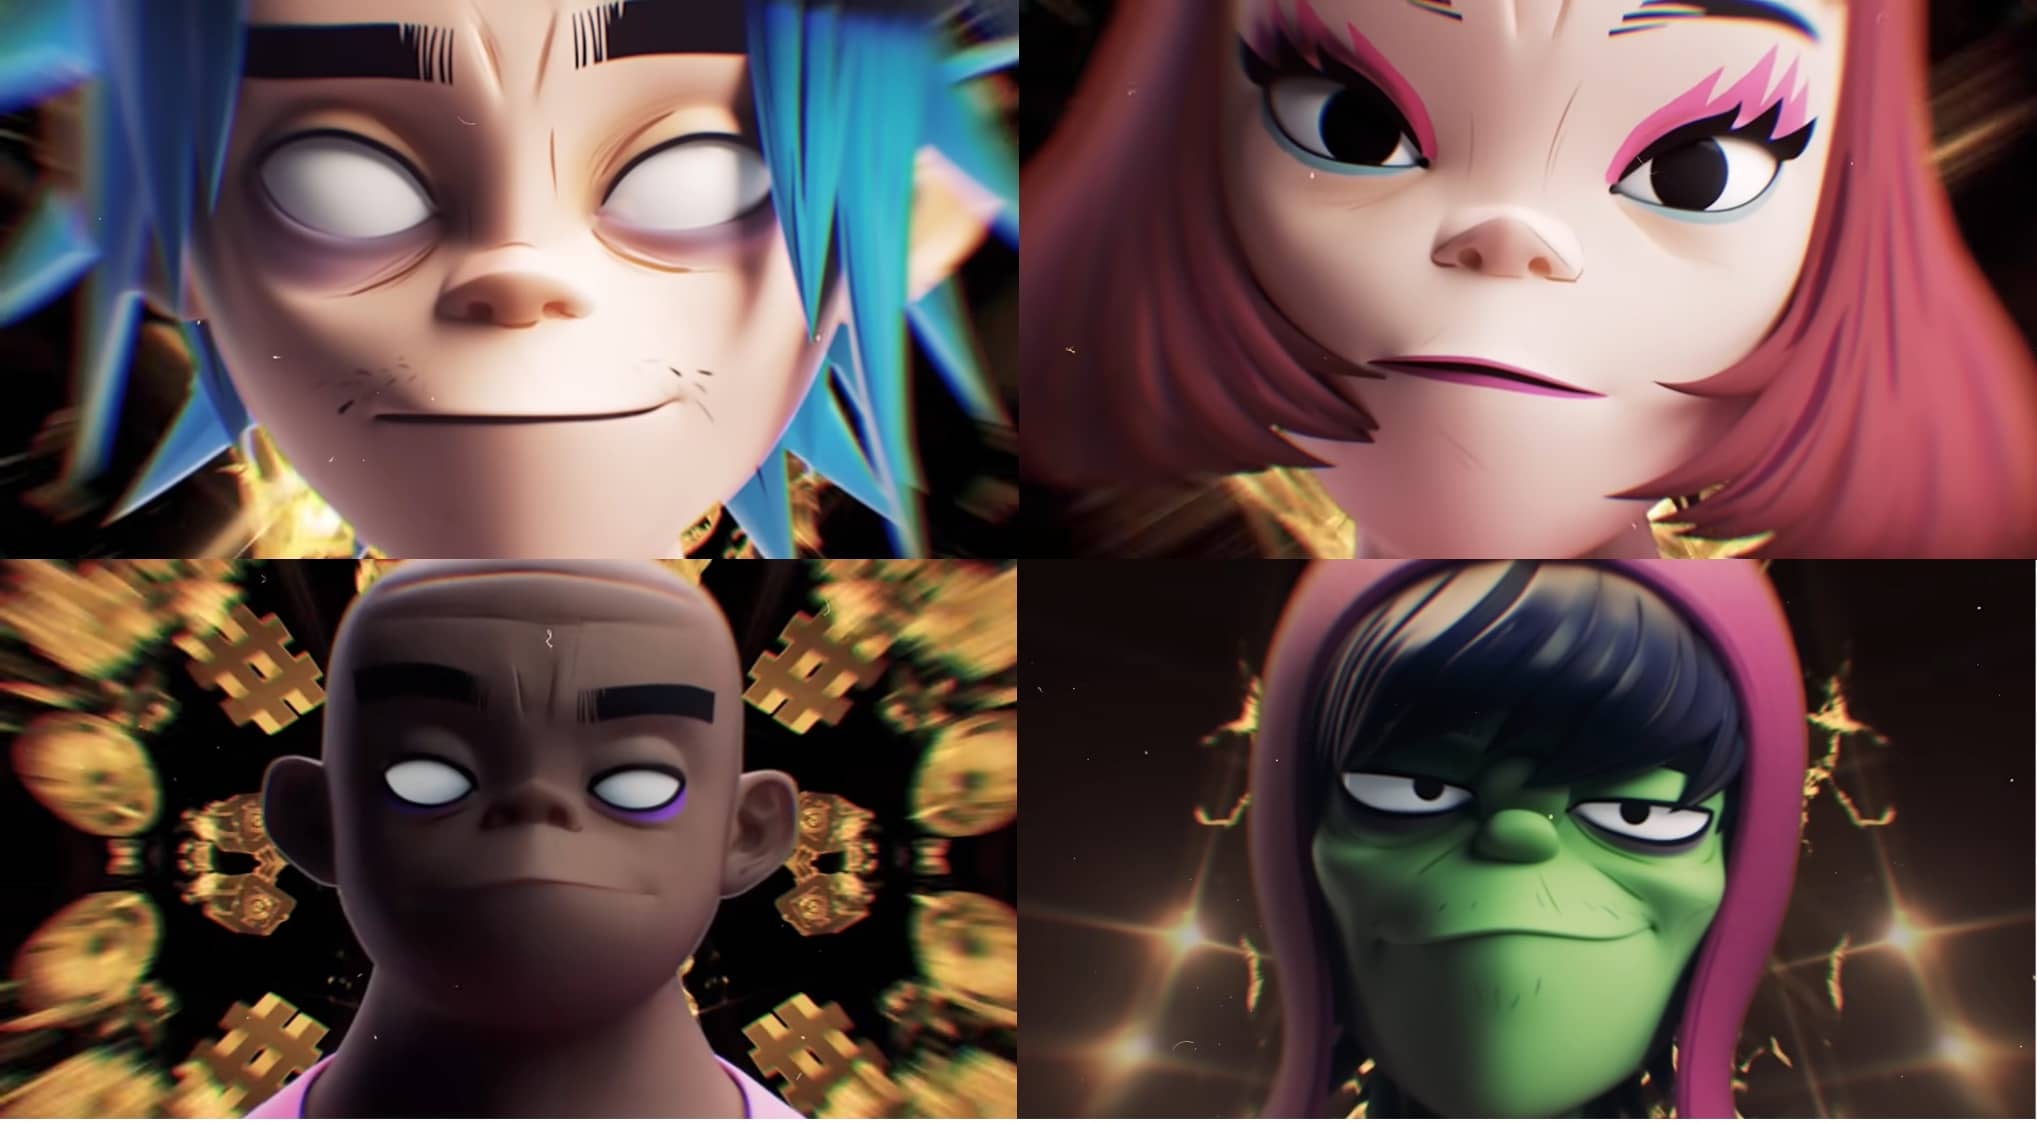 Gorillaz - New Gold ft Tame Impala & Bootie Brown (Visualiser with